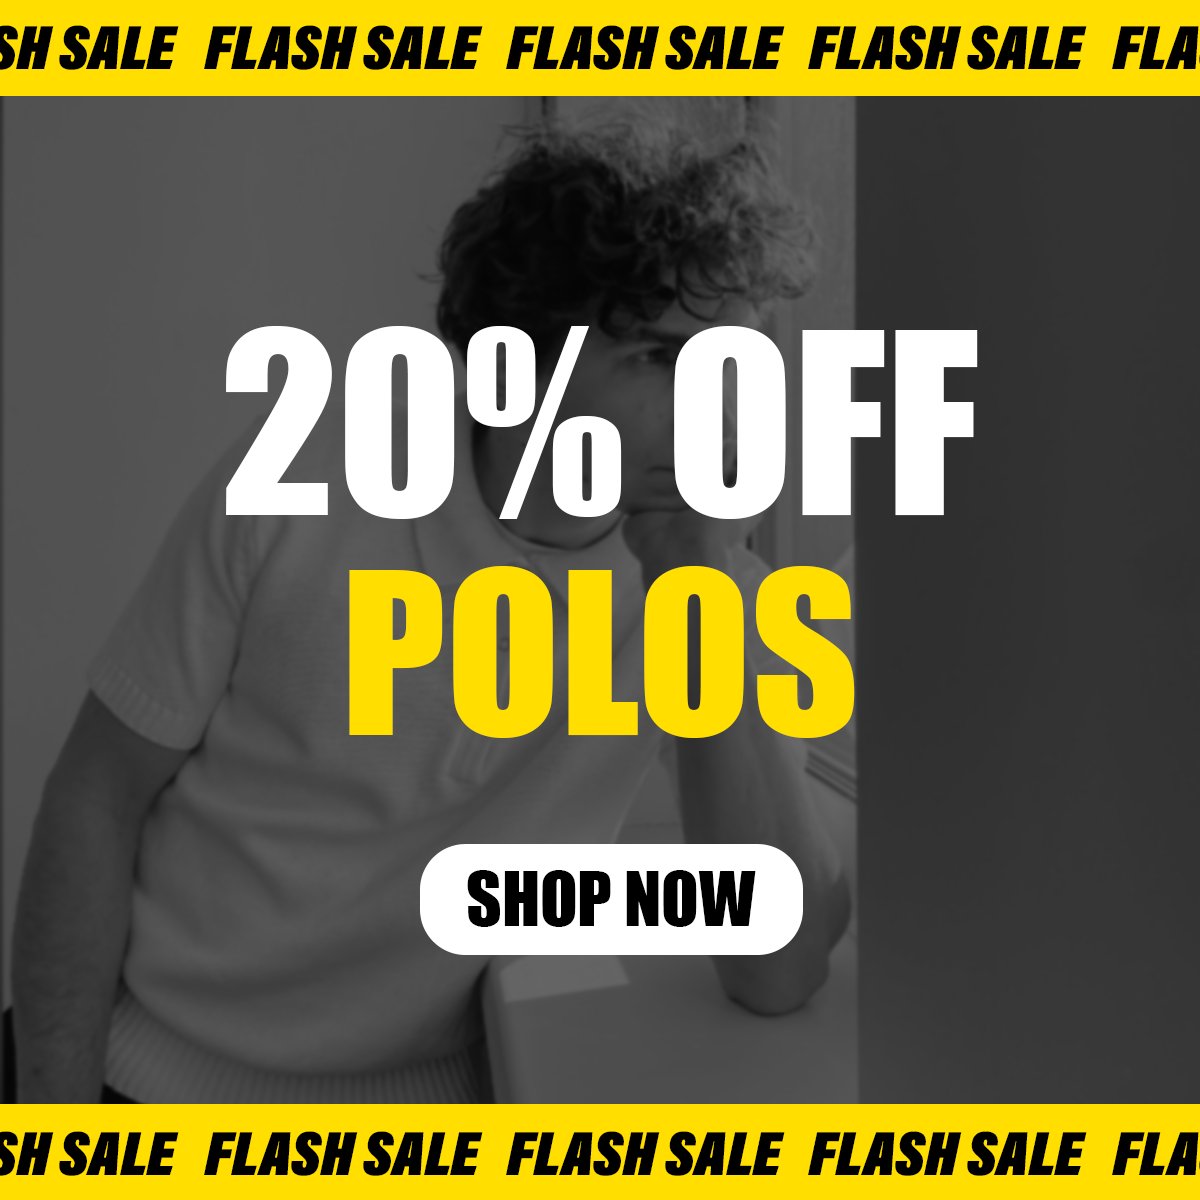 ⚡ FLASH SALE ⚡ That's right. 20% off for the next 24 hours. Get your embroidered polo shirt whilst in stock!! Apparel perfect to wear during the warmer months. Wear club colours wherever you go 🔴 Shop now 👉 unitedreds.com/sale #MUFC